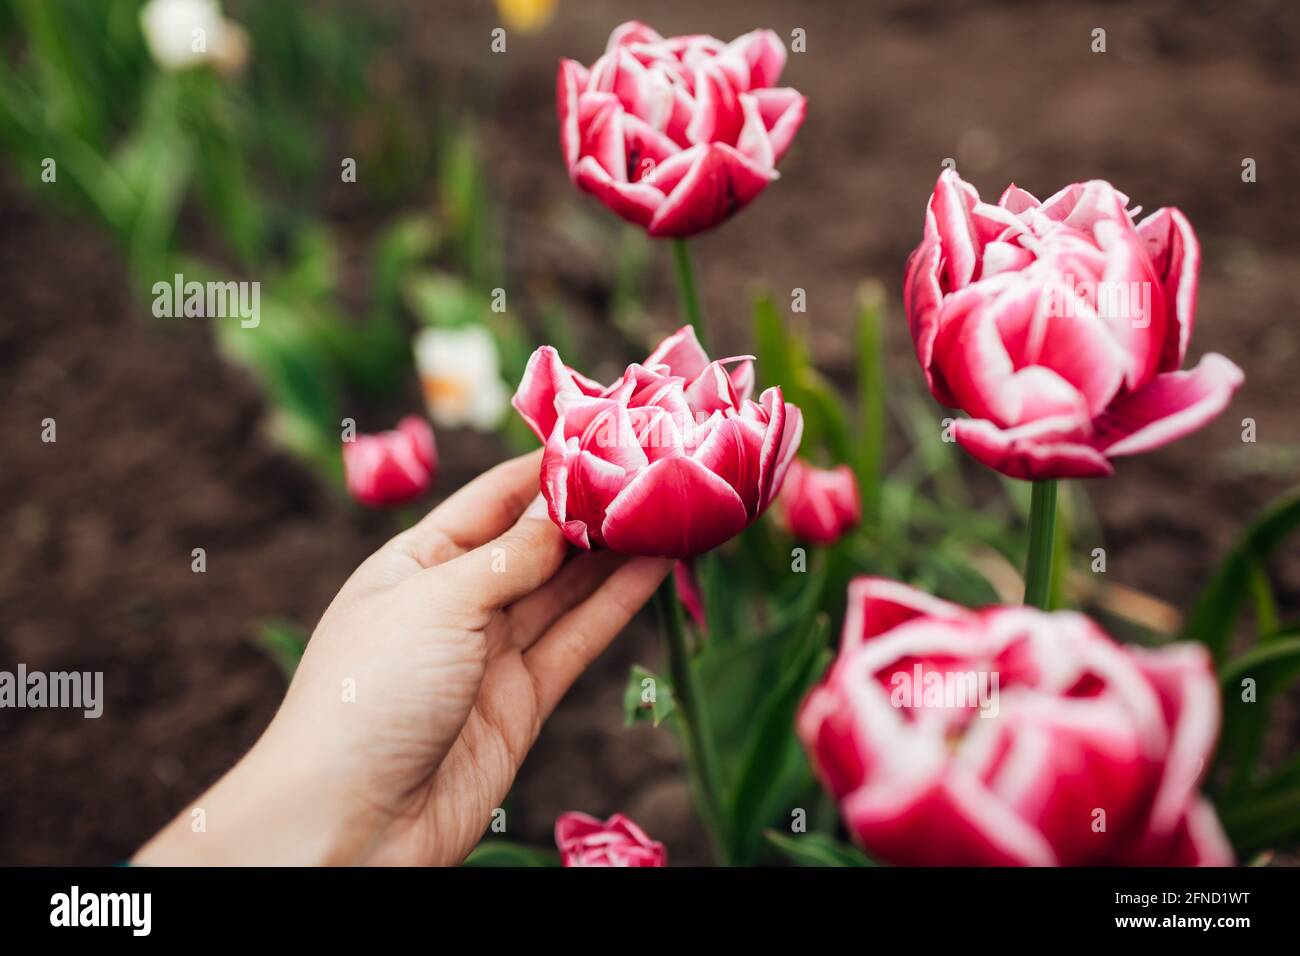 Gardener touch pink peony tulips with white edge growing in spring garden. Columbus variety. Flowers blooming outdoors in may Stock Photo